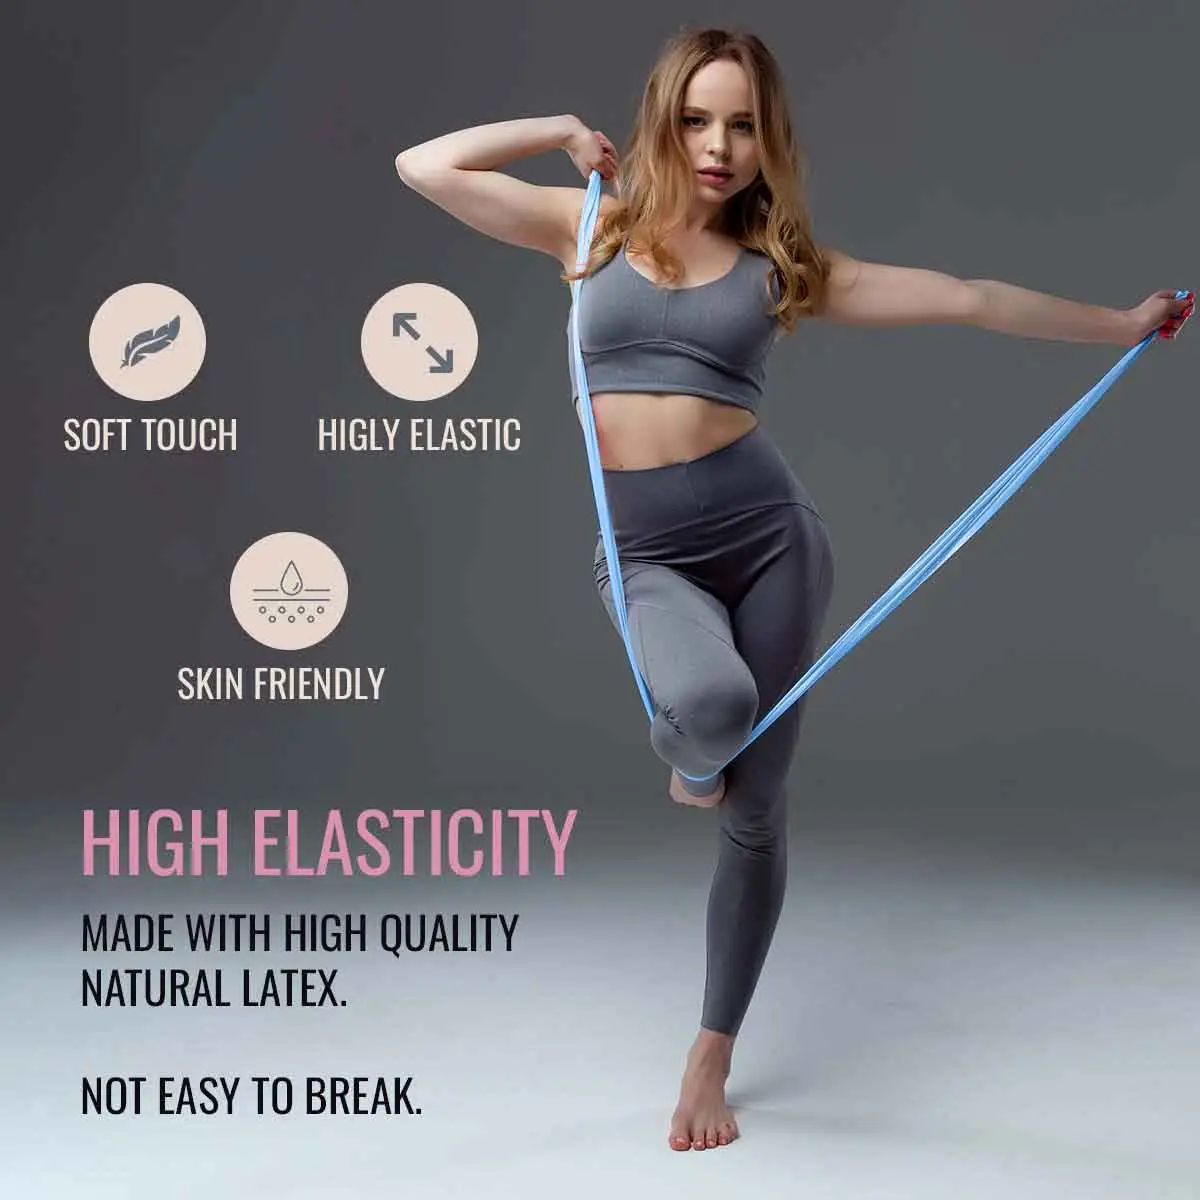 Durafit Resistance Band Orlb2 with High Elasticity